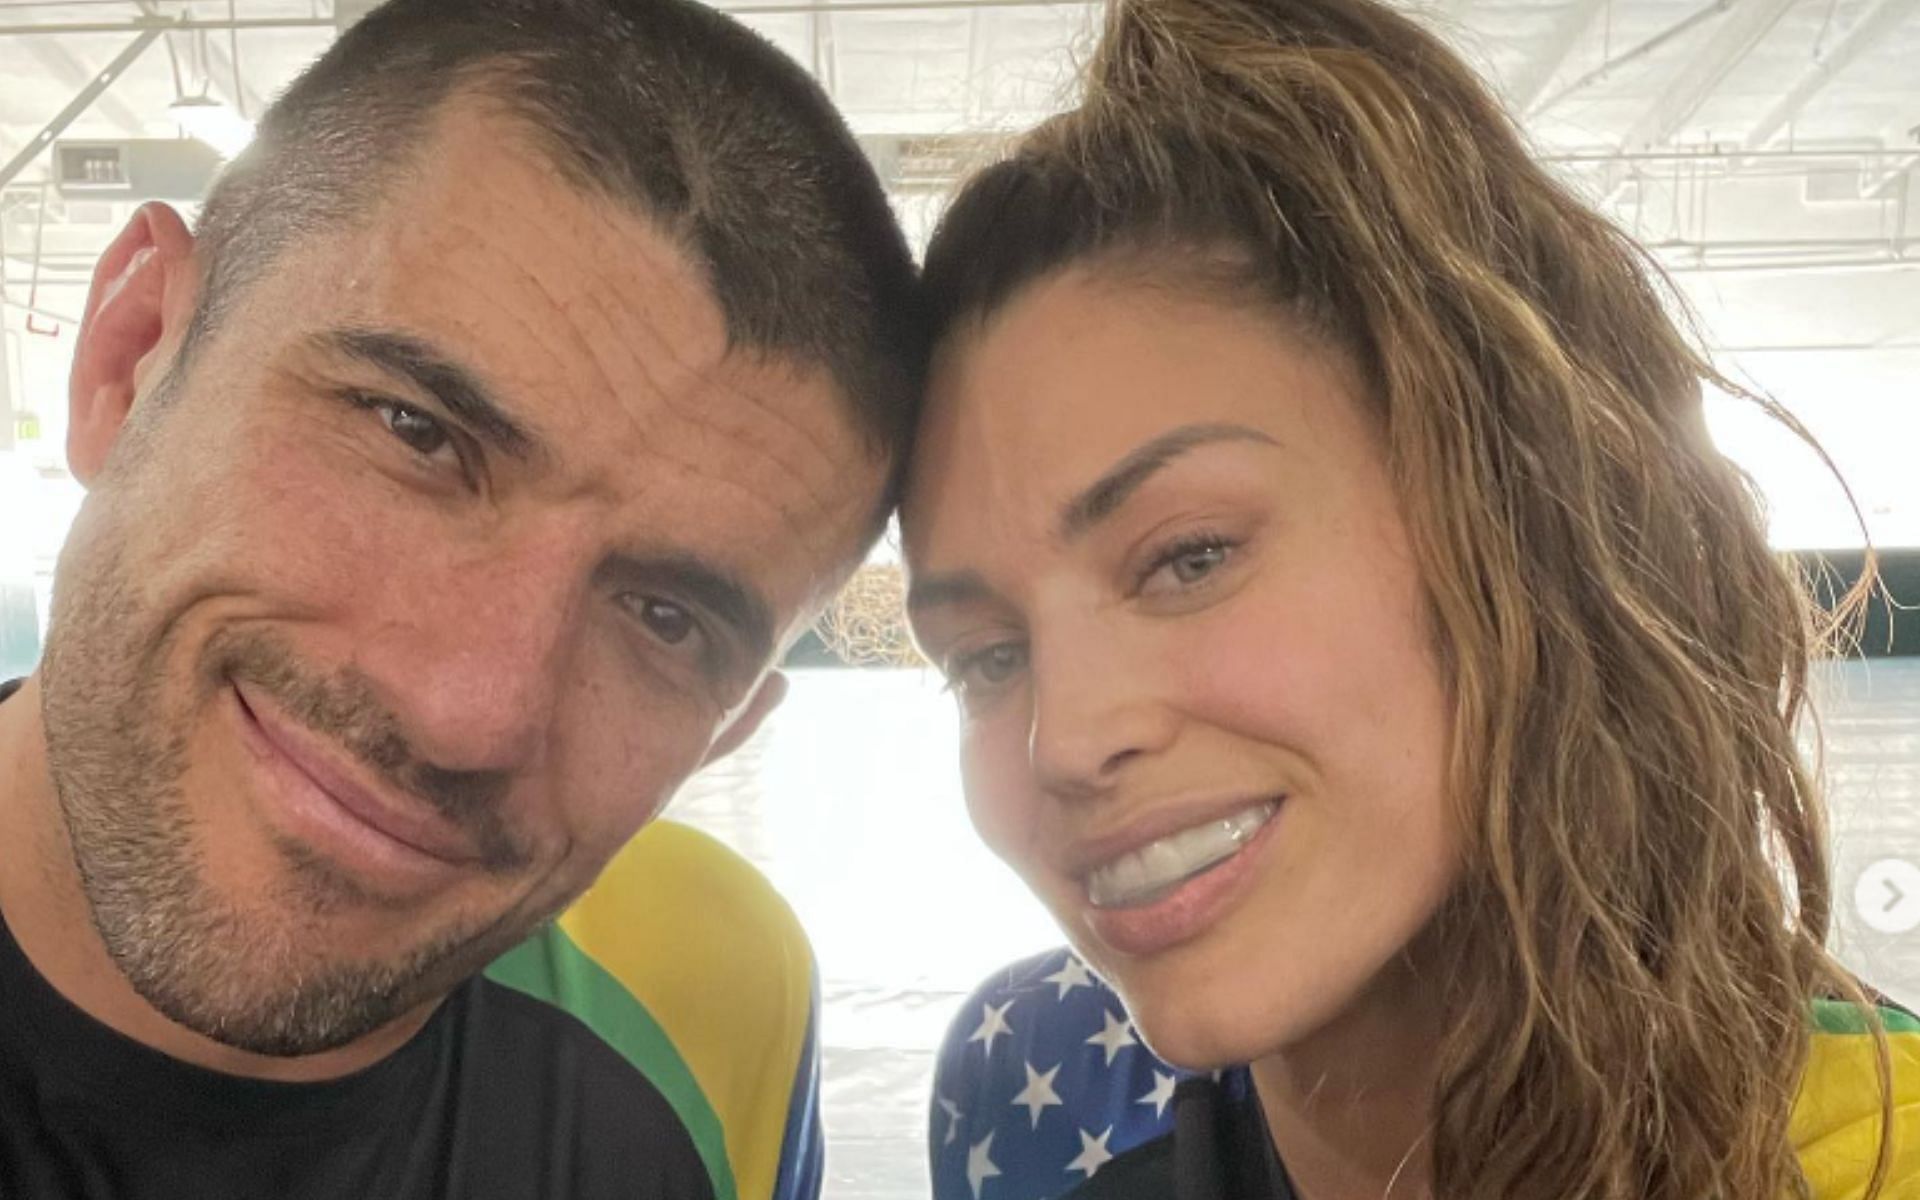 Eve and her husband Rener Gracie